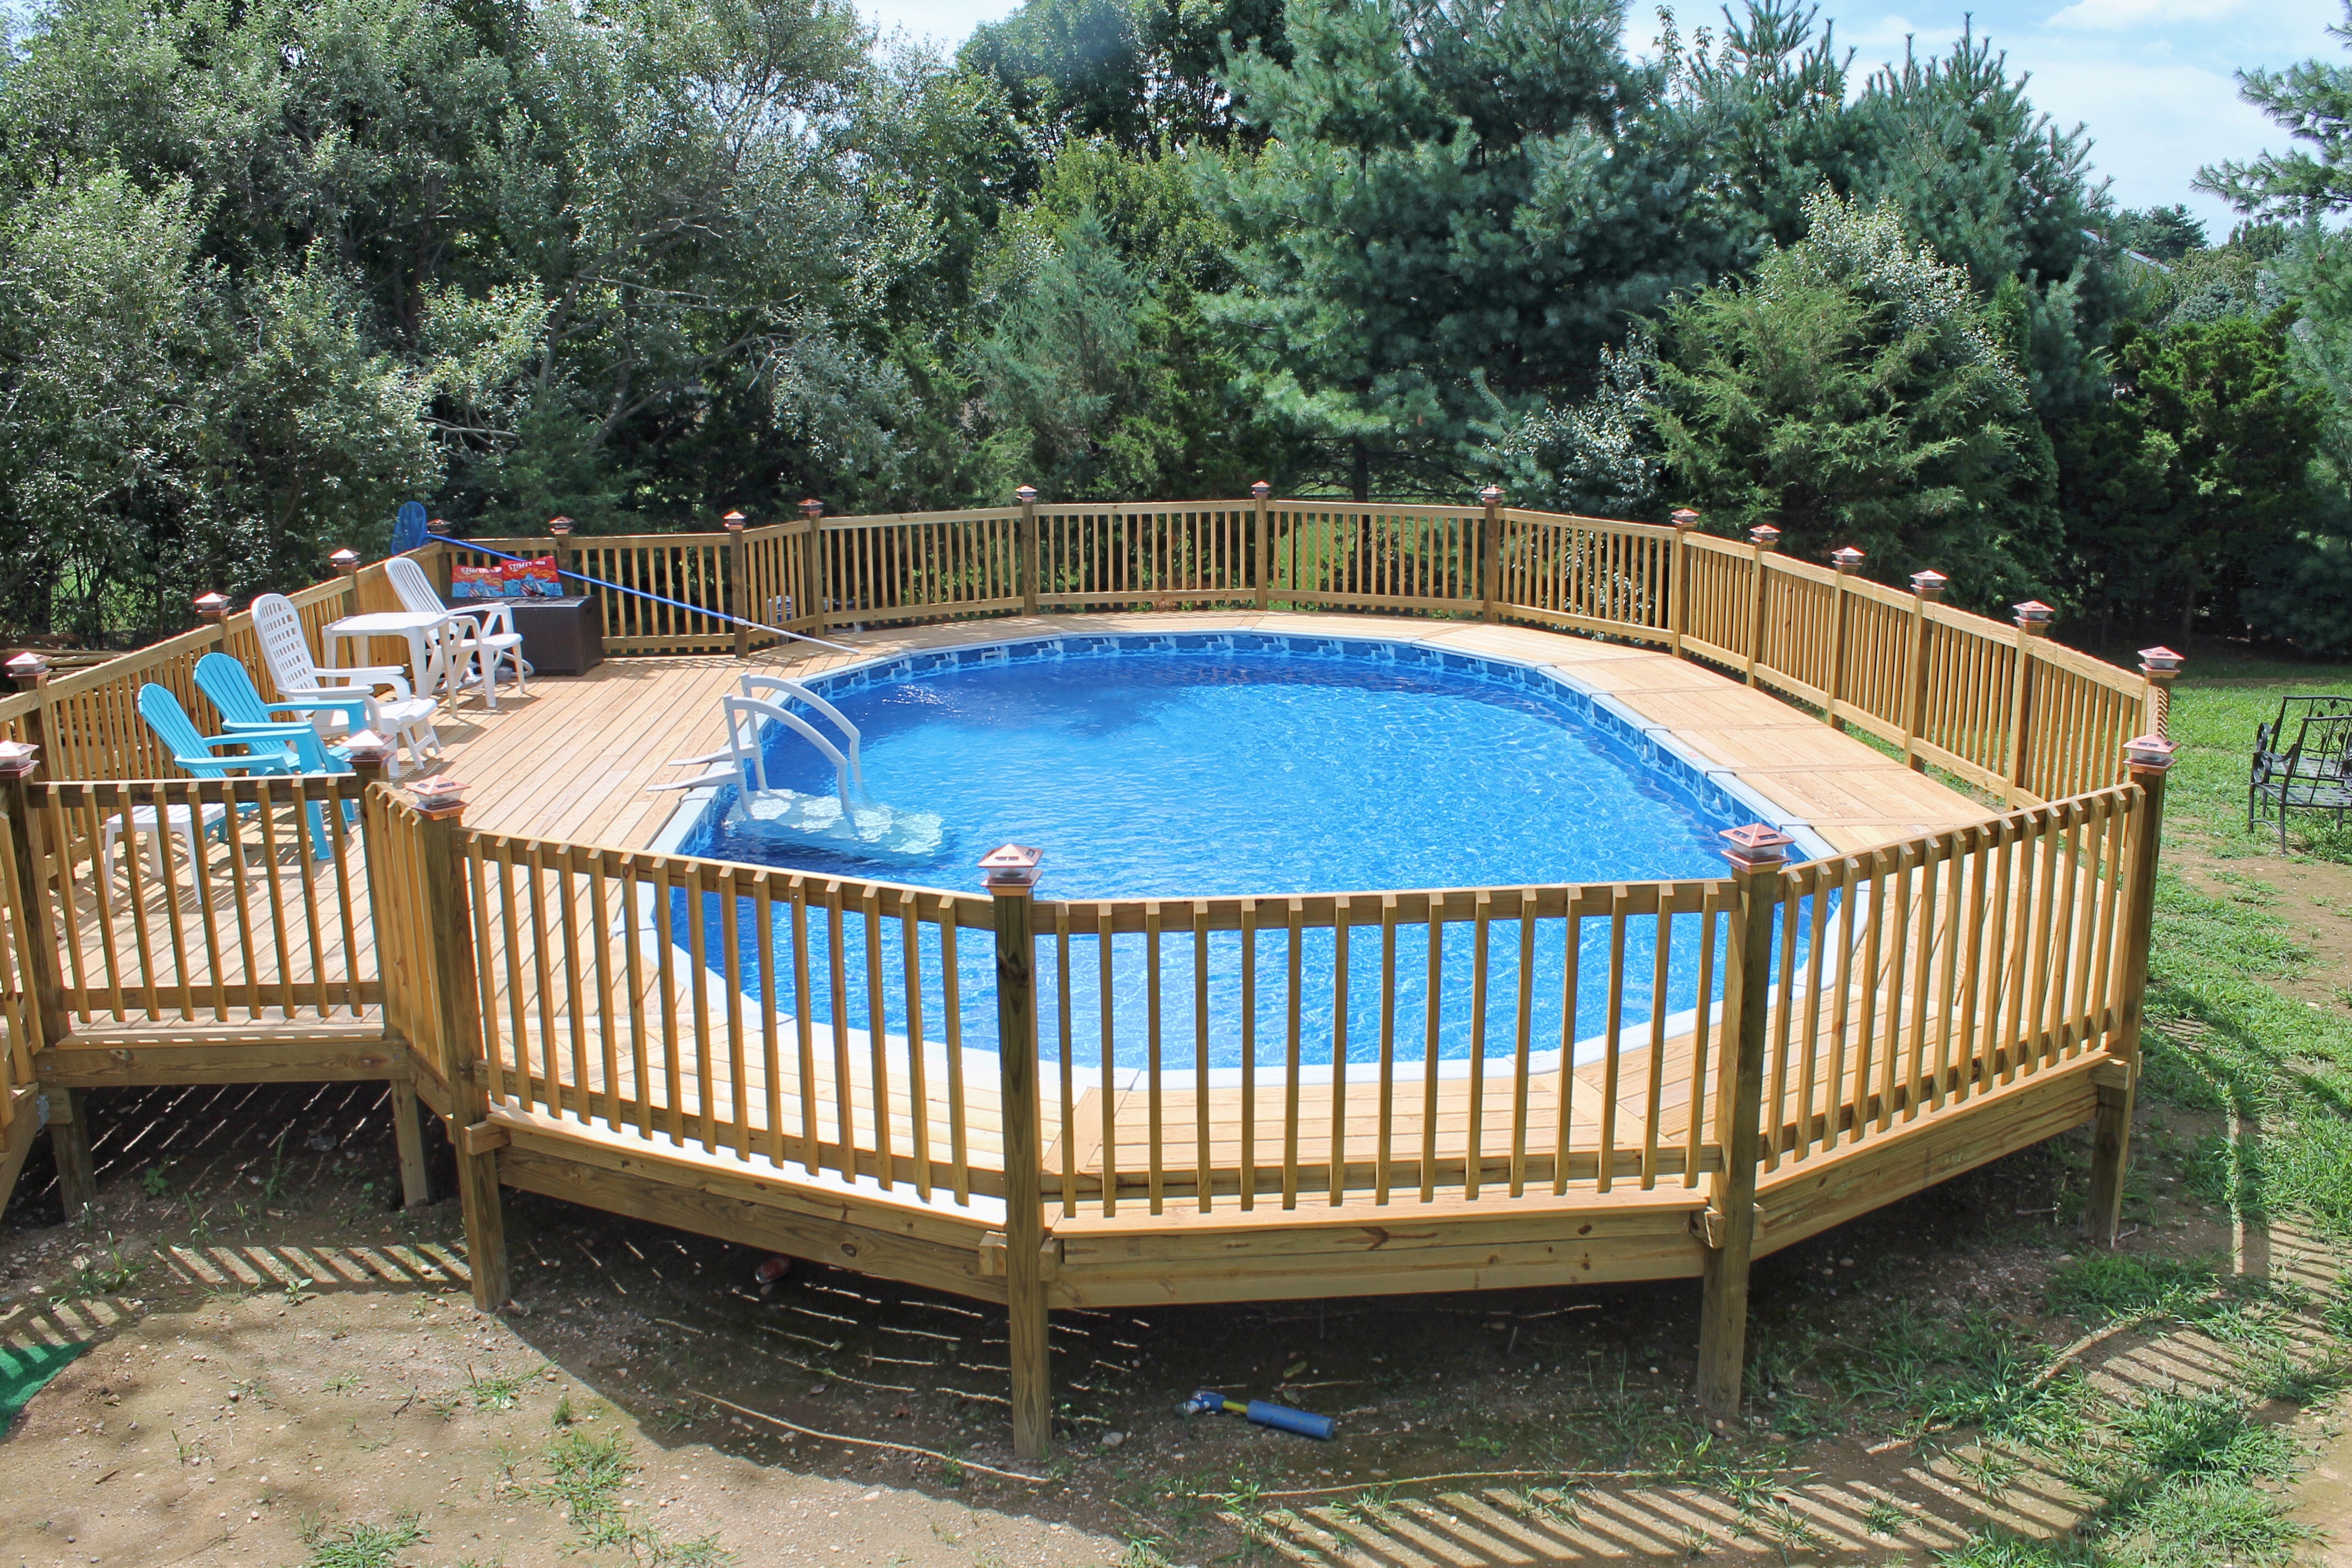 Above Ground Pool Installation Cost, Cost To Build An Above Ground Pool Deck